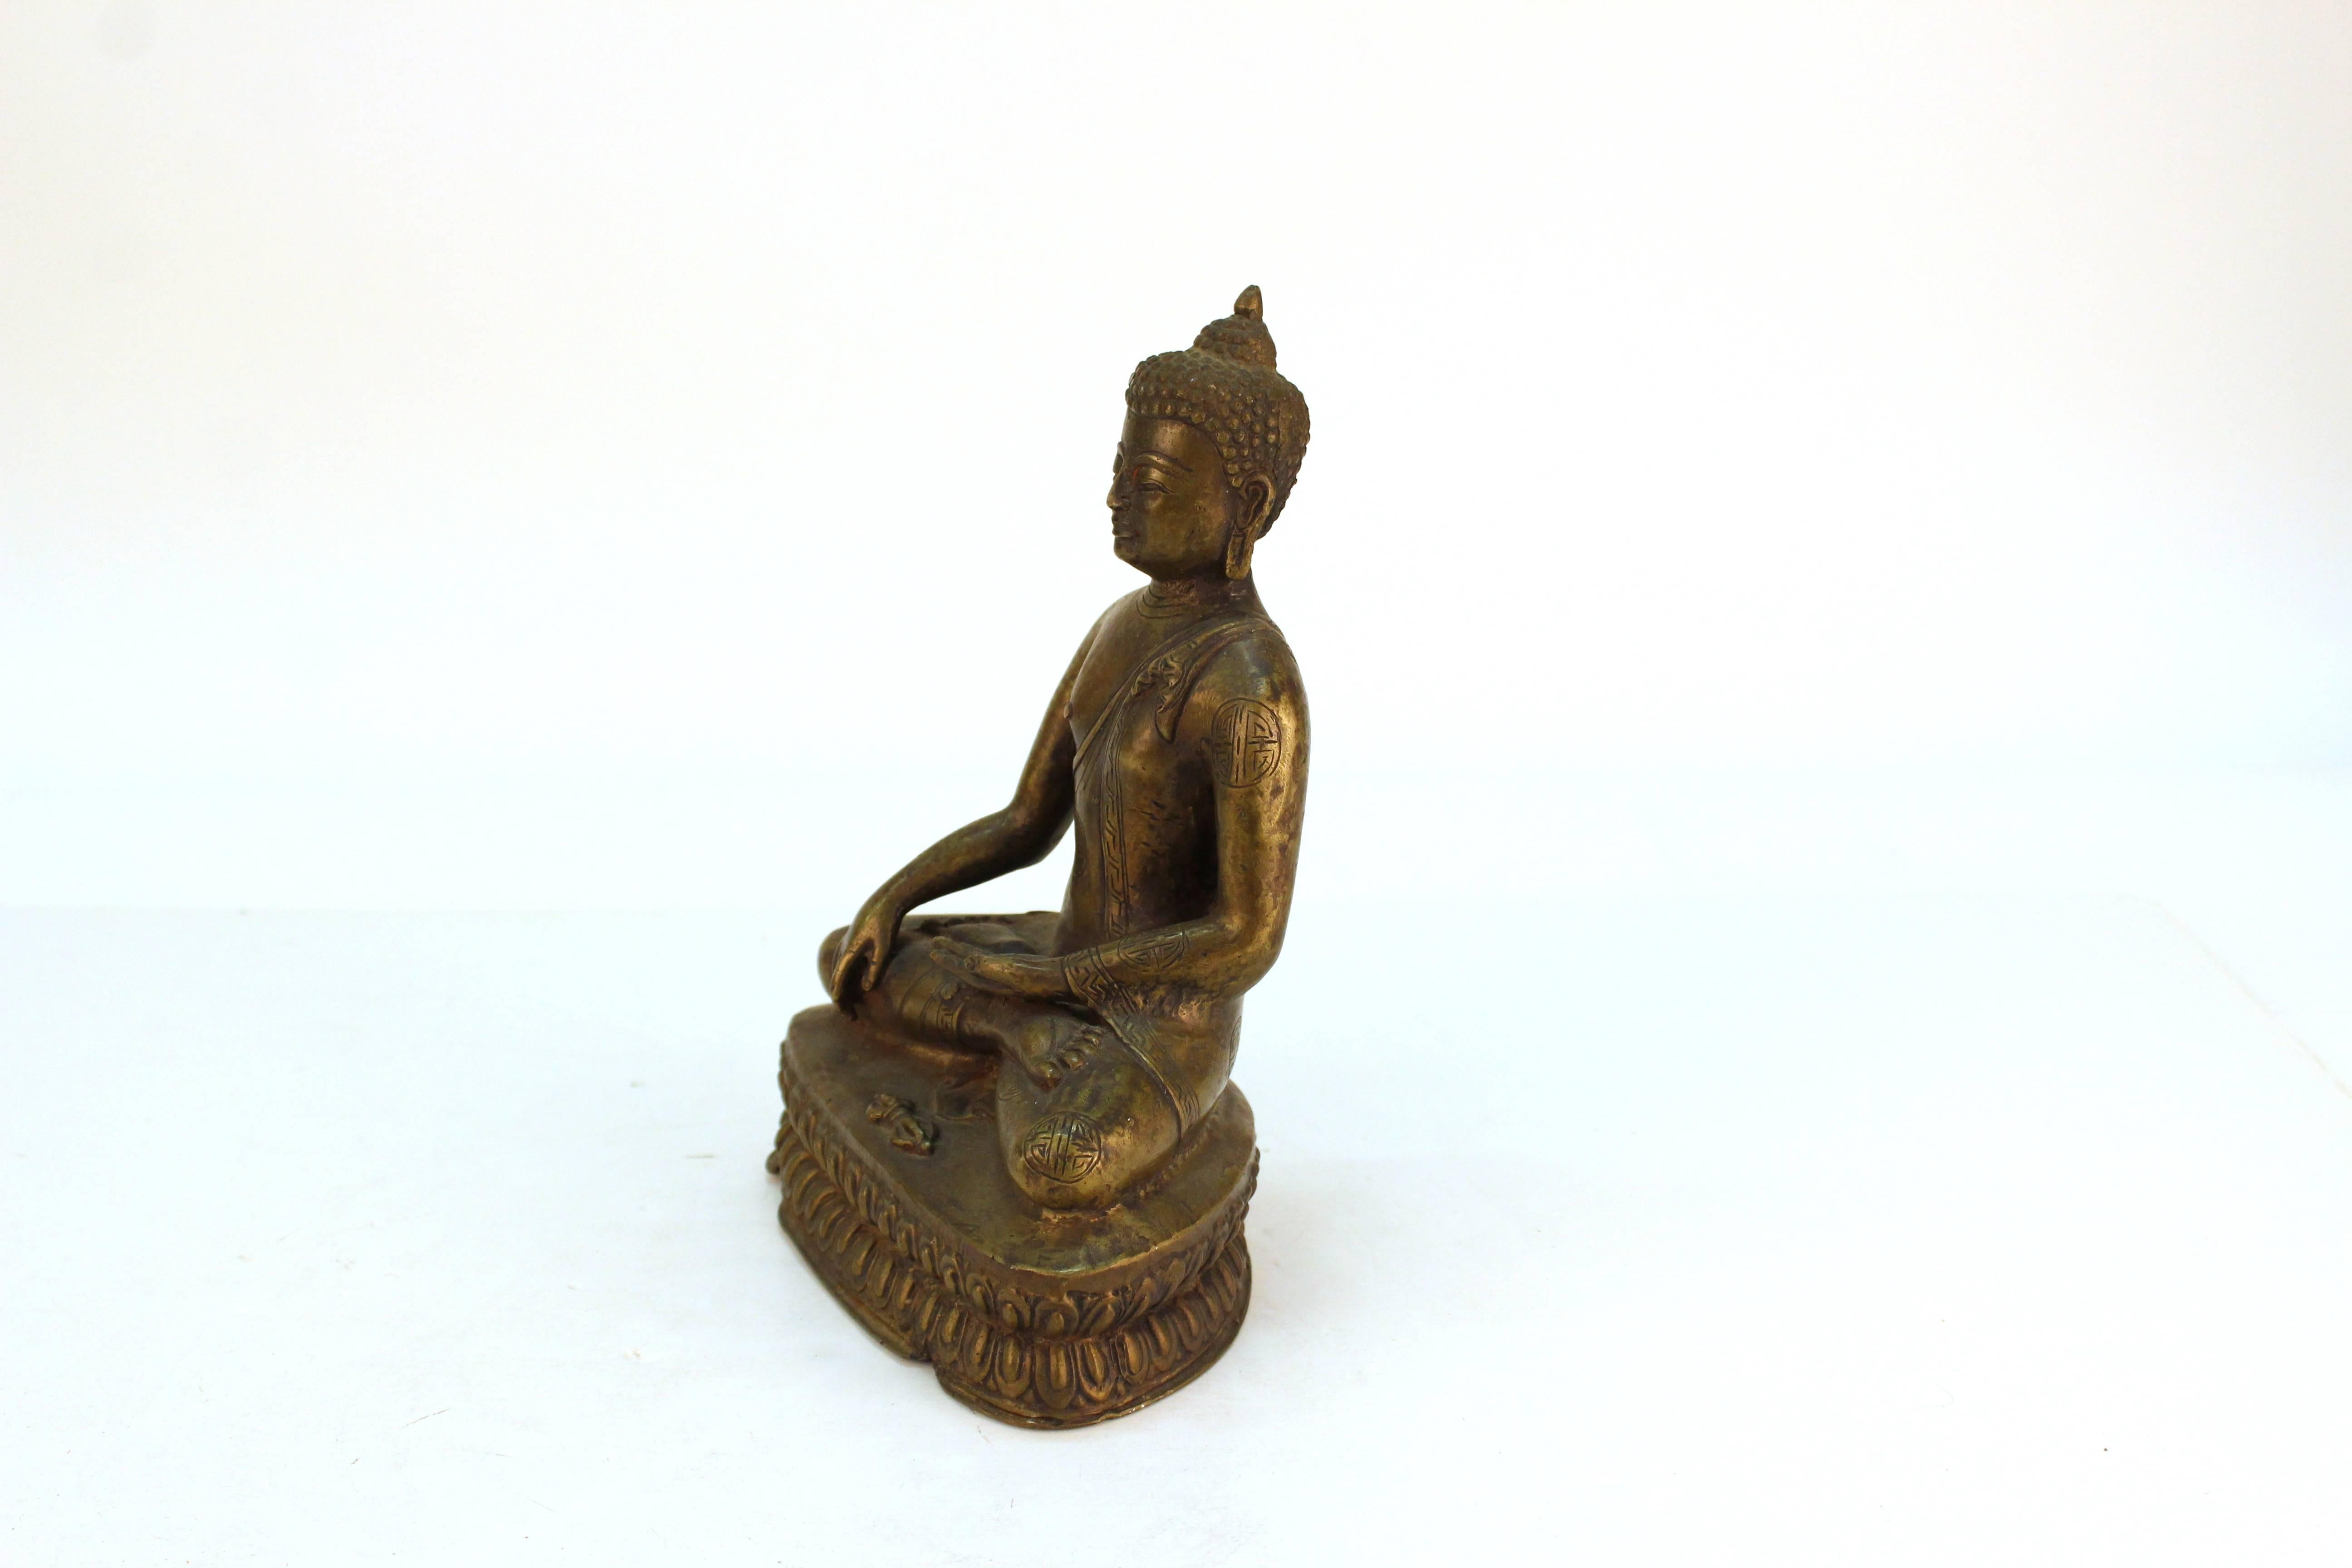 A Chinese bronze sculpture of a Buddha in a seated position. The piece is in great vintage condition.